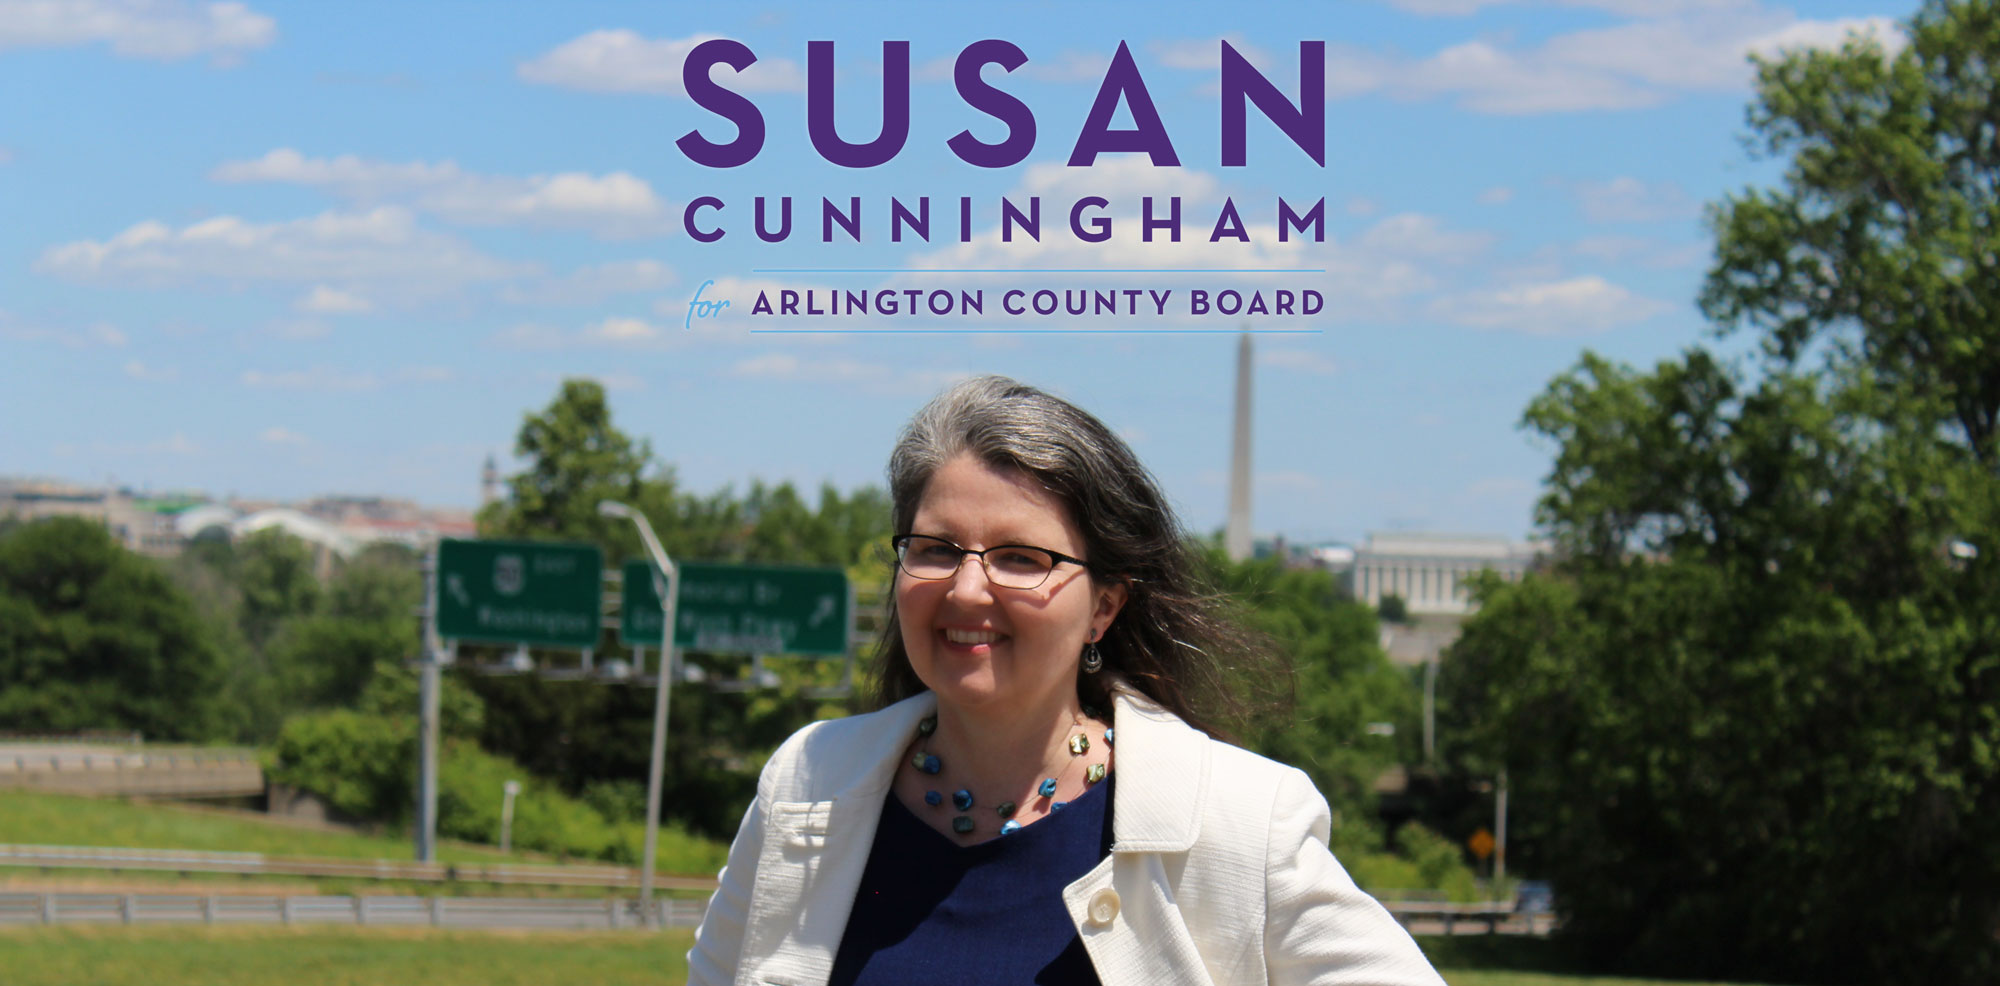 Susan for Arlington, image shows county commission candidate with DC skyline in background